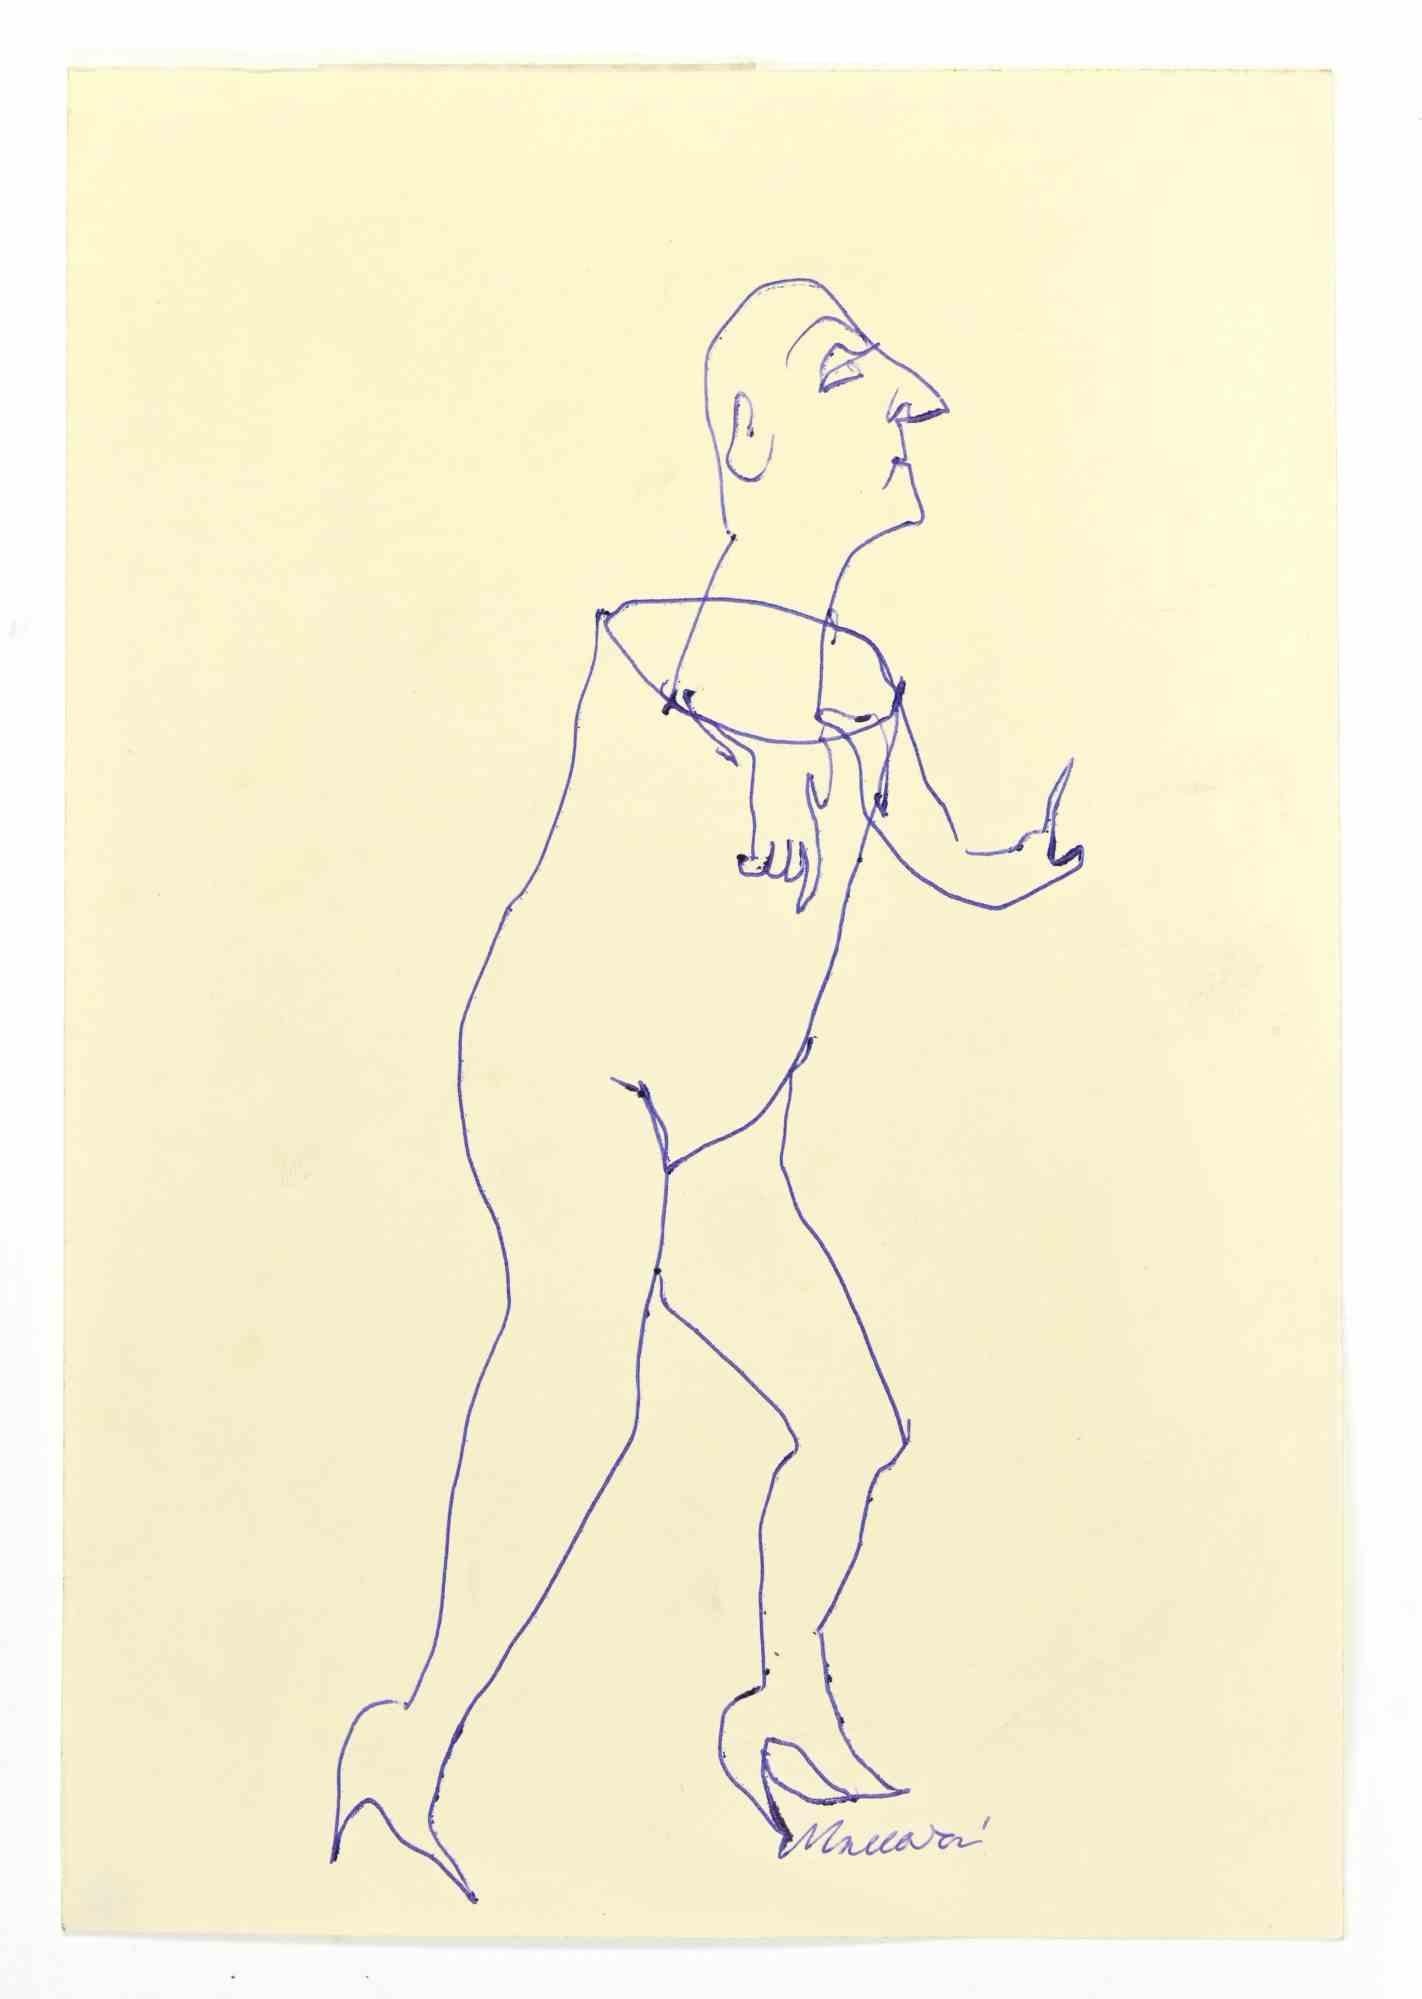 Hybrid Figure is a Pen Drawing realized by Mino Maccari  (1924-1989) in the 1960s.

Hand-signed on the lower.

Good condition with slight folding.

Mino Maccari (Siena, 1924-Rome, June 16, 1989) was an Italian writer, painter, engraver and